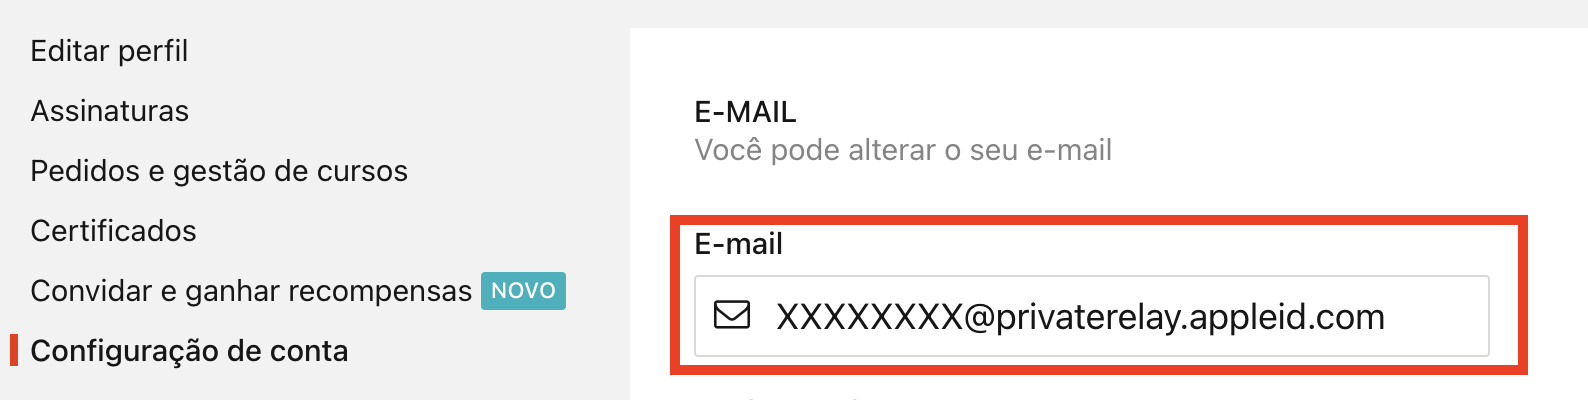 PT_Account_email.png